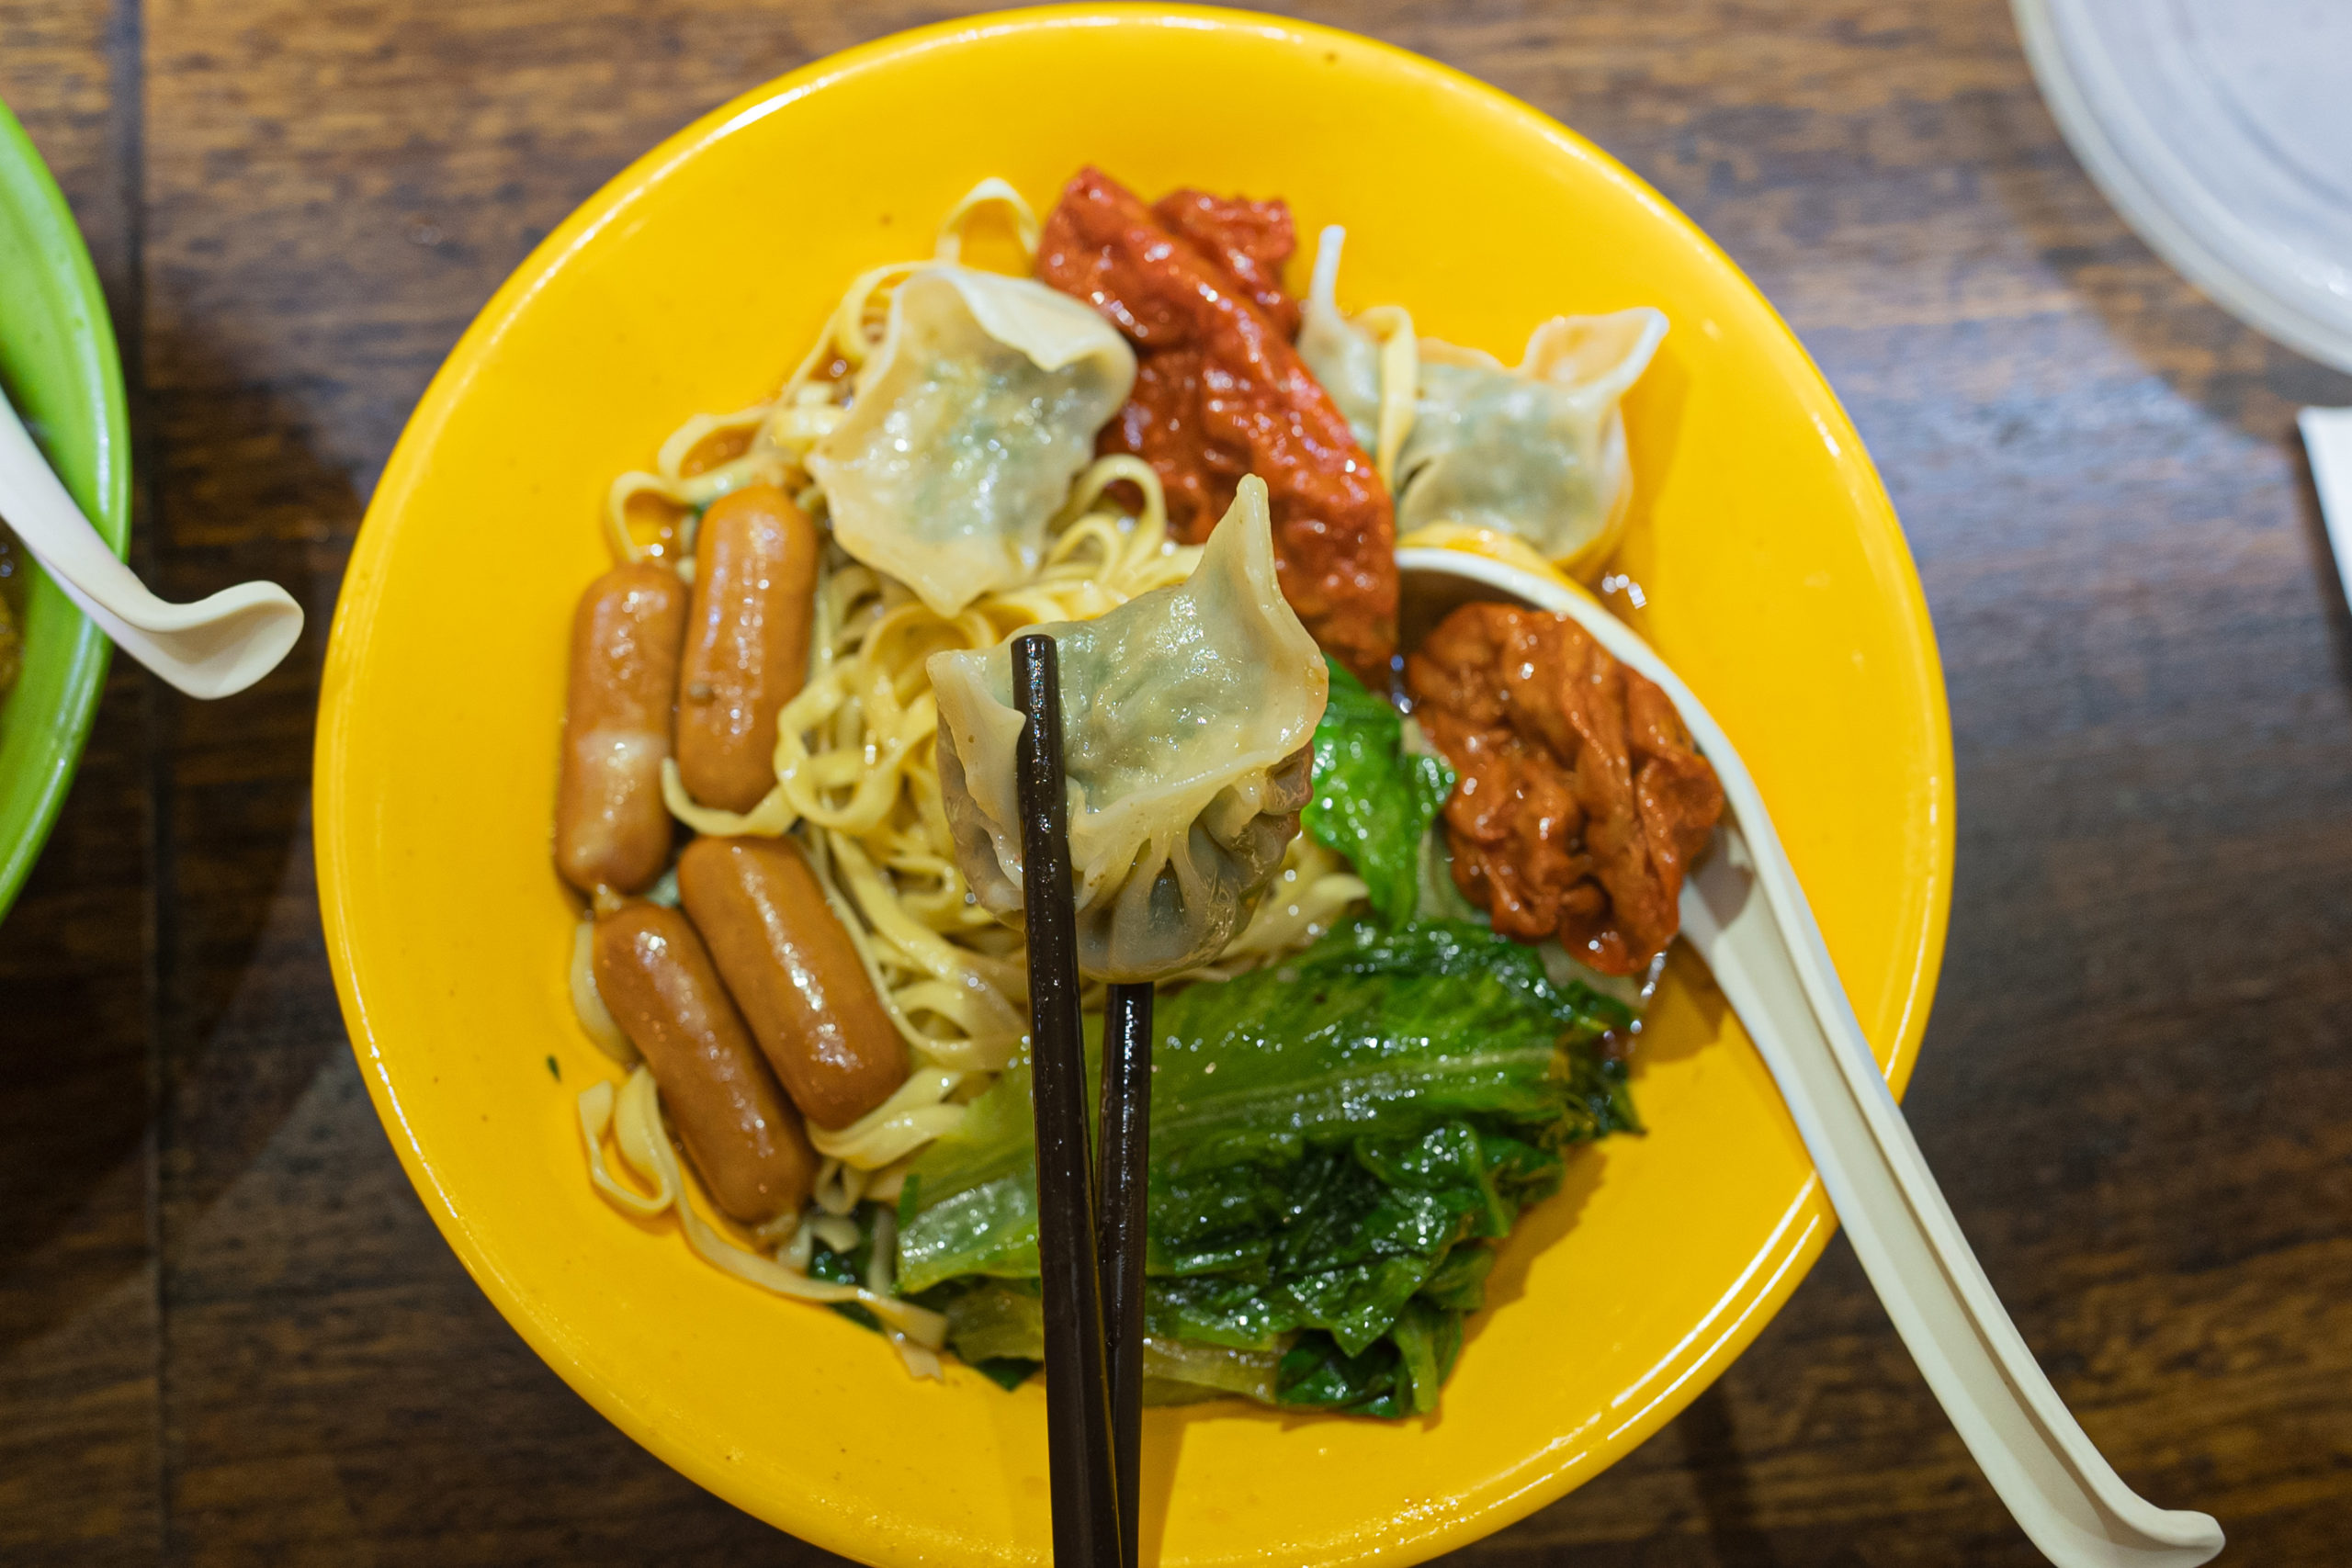 Our choice is thick noodles with dumplings, sausages, vegetables, sour wheat gluten. How about yours?